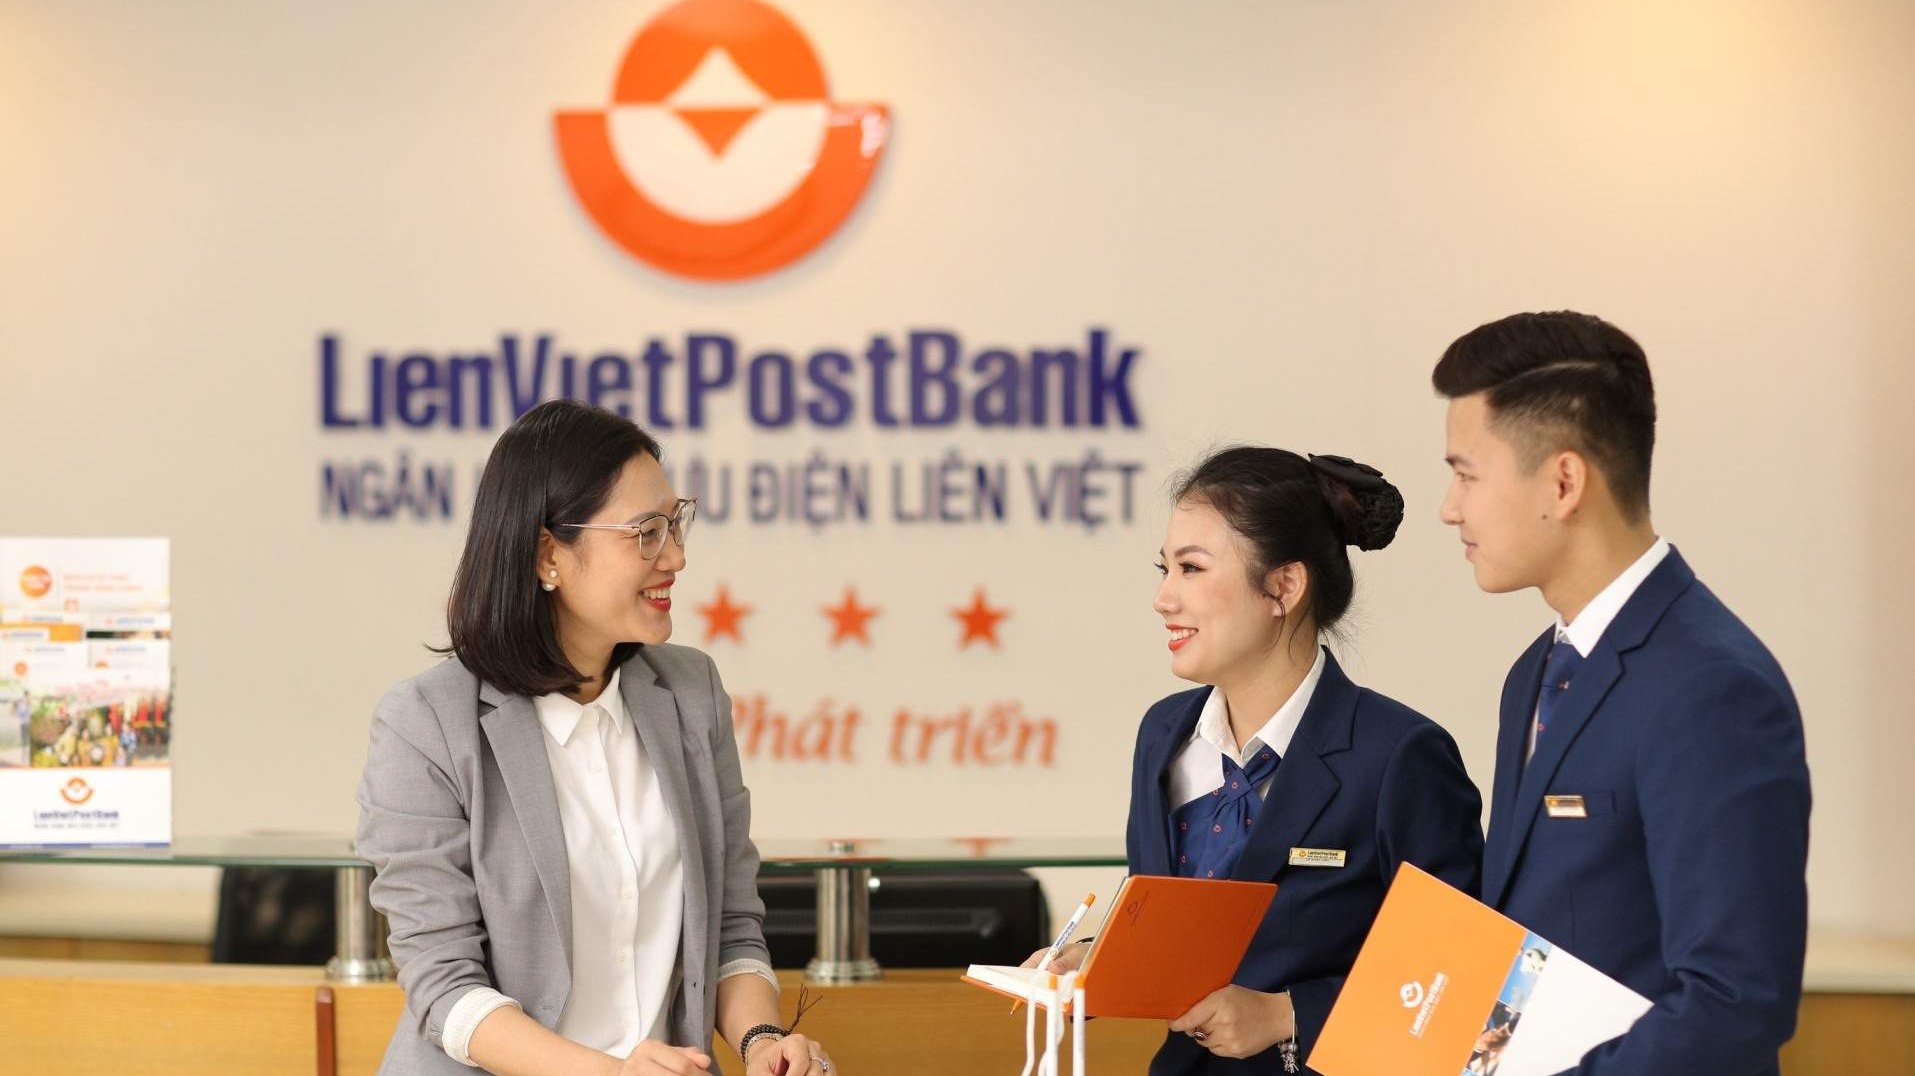 LienVietPostBank to sign an exclusive bancassurance agreement in mid-June